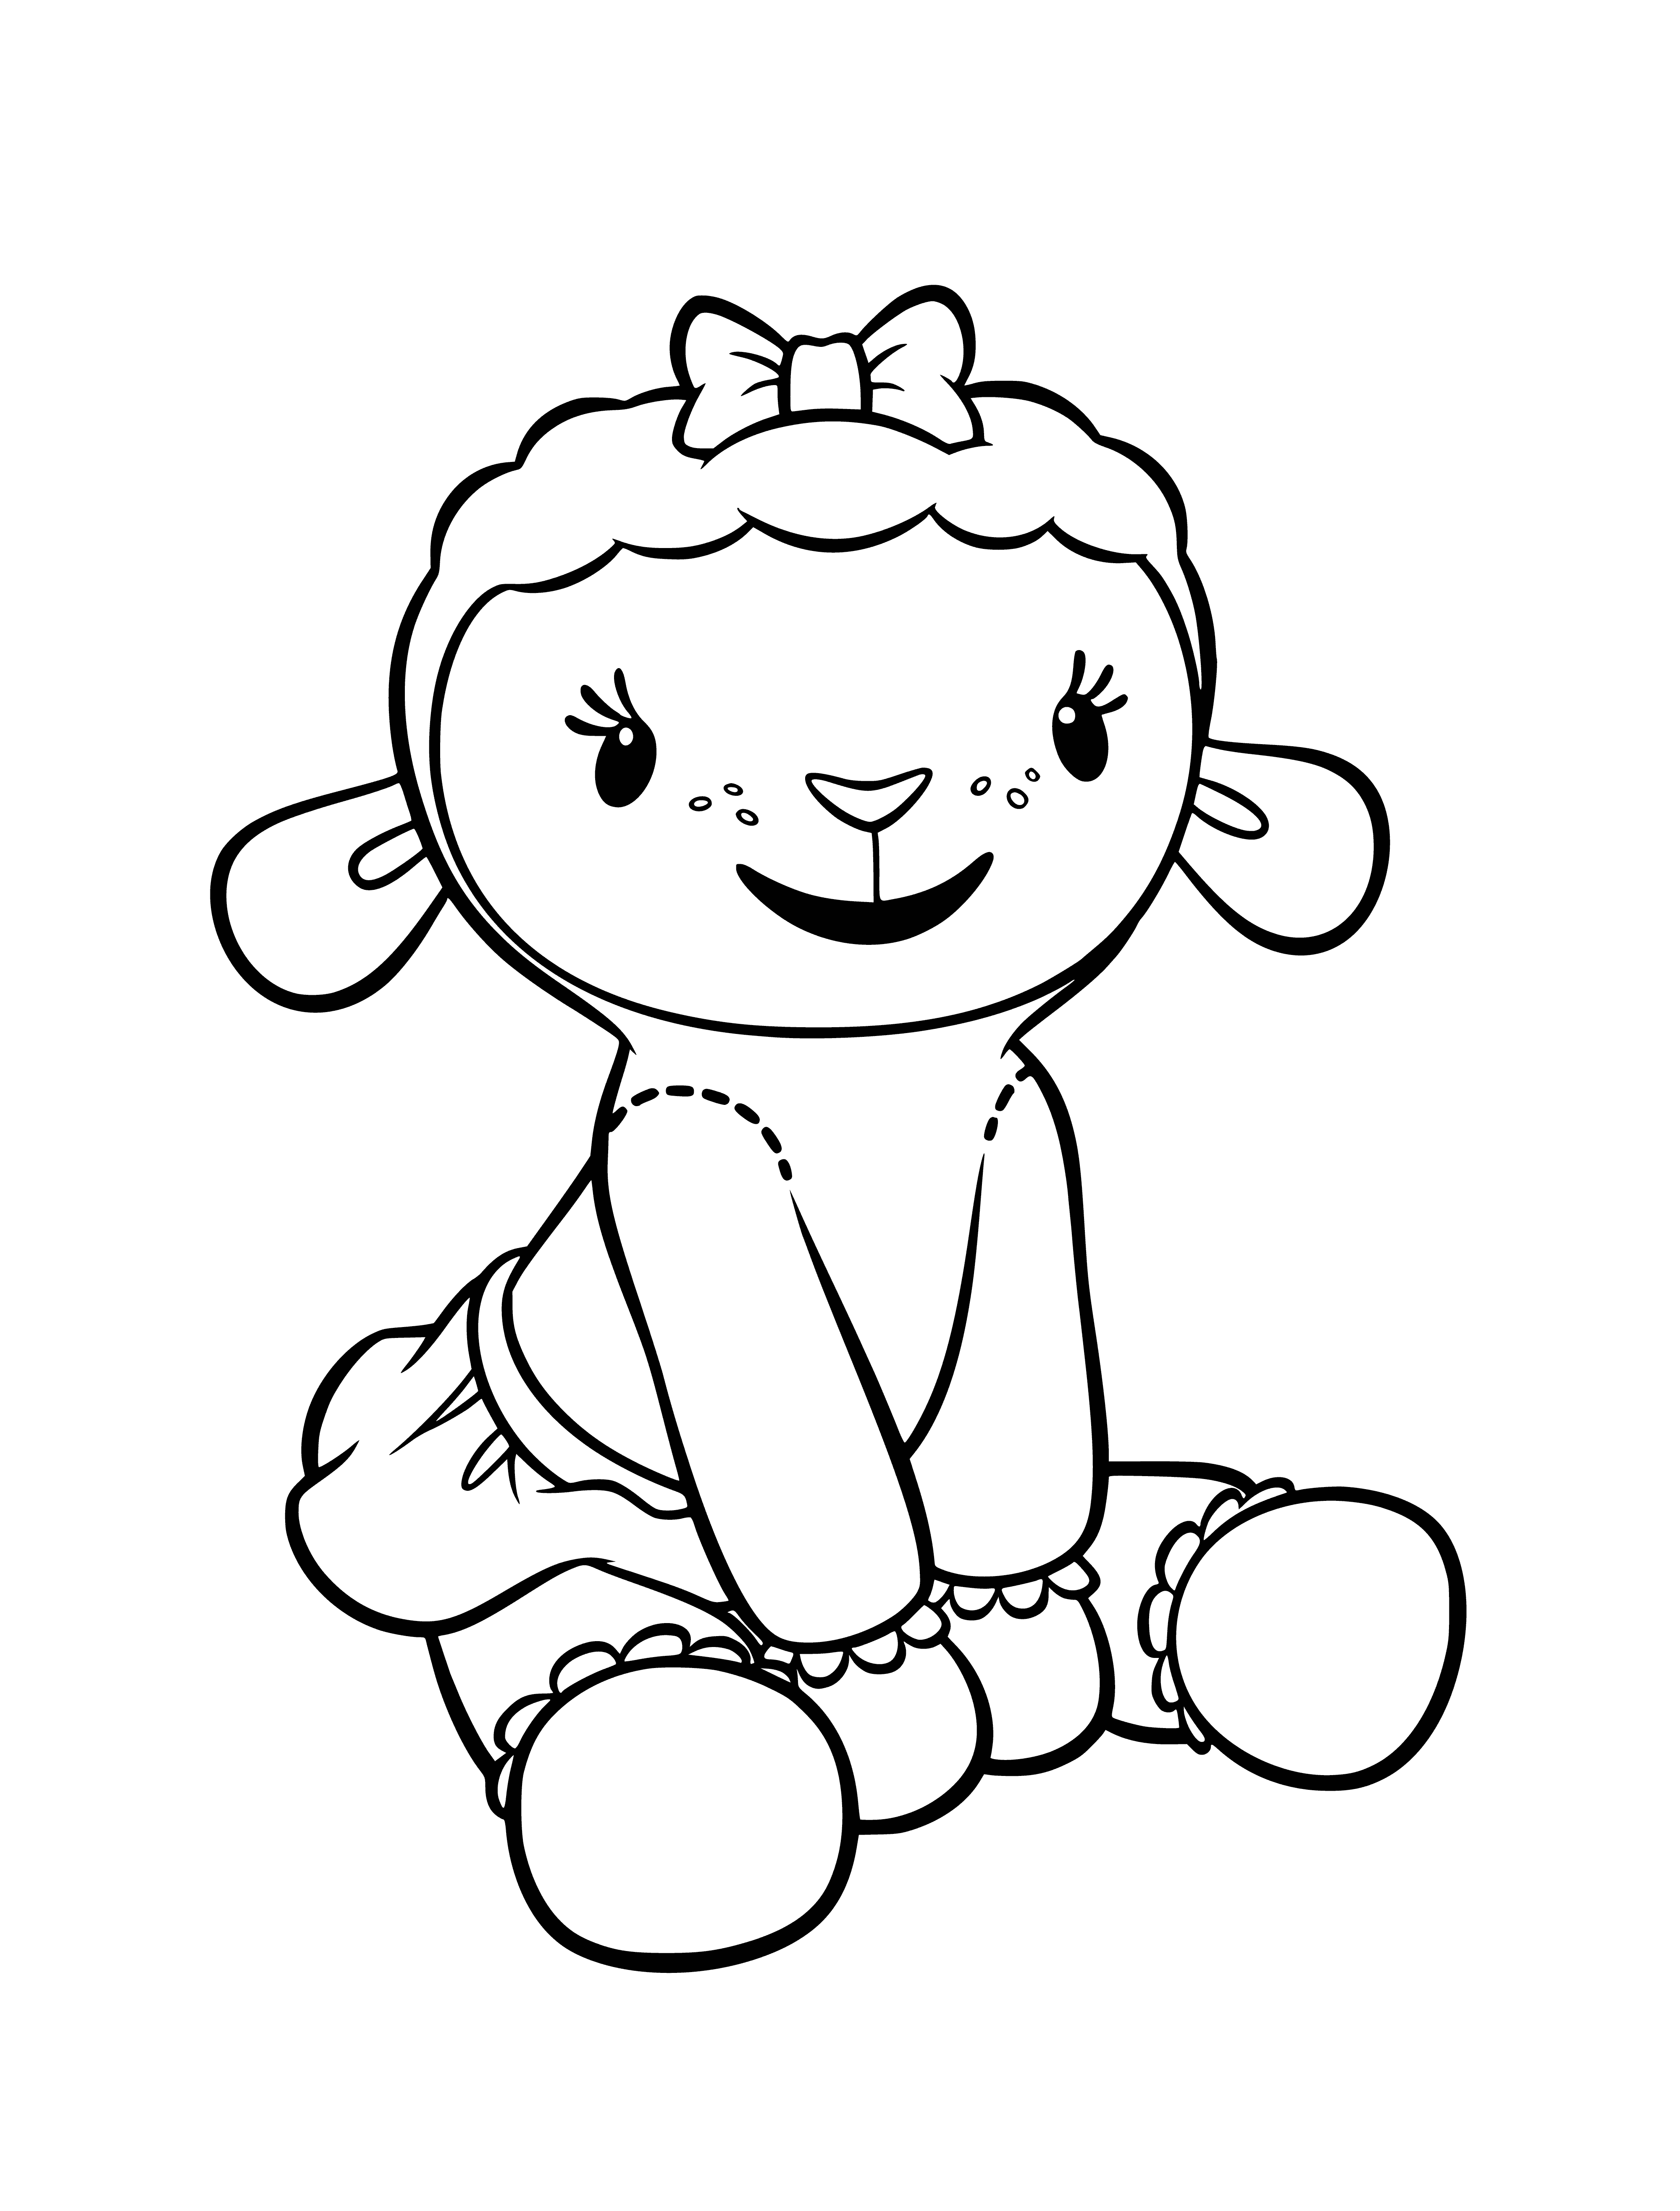 Lammy the Sheep coloring page